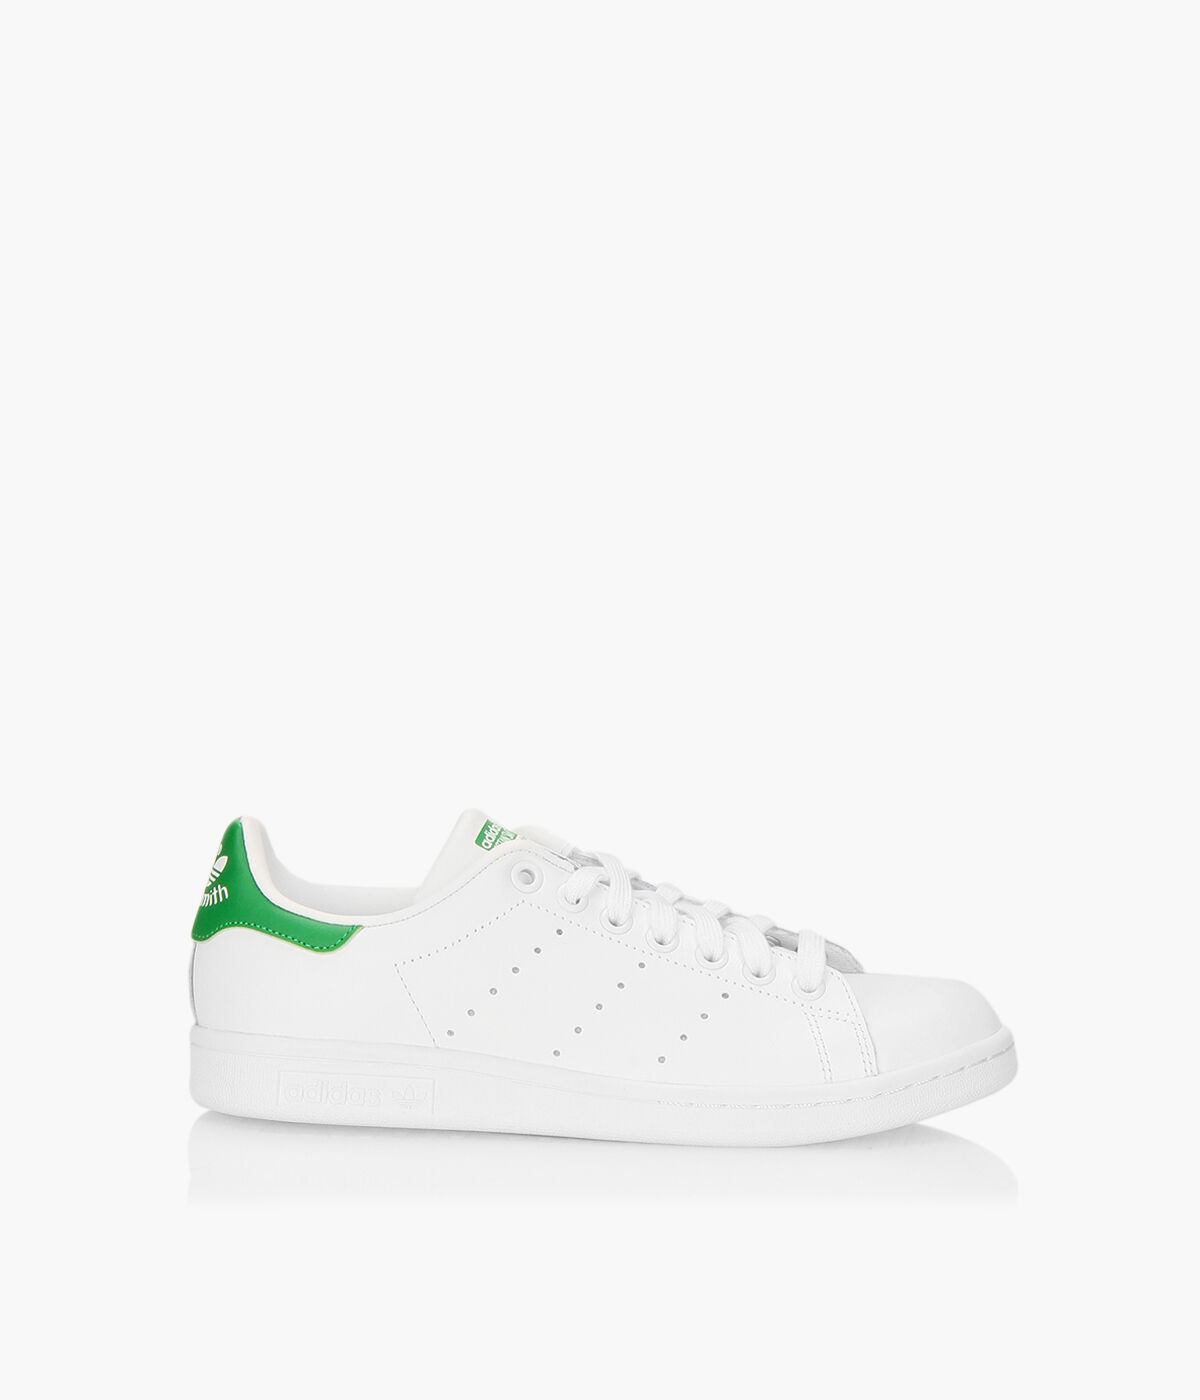 ADIDAS STAN SMITH - White | Browns Shoes